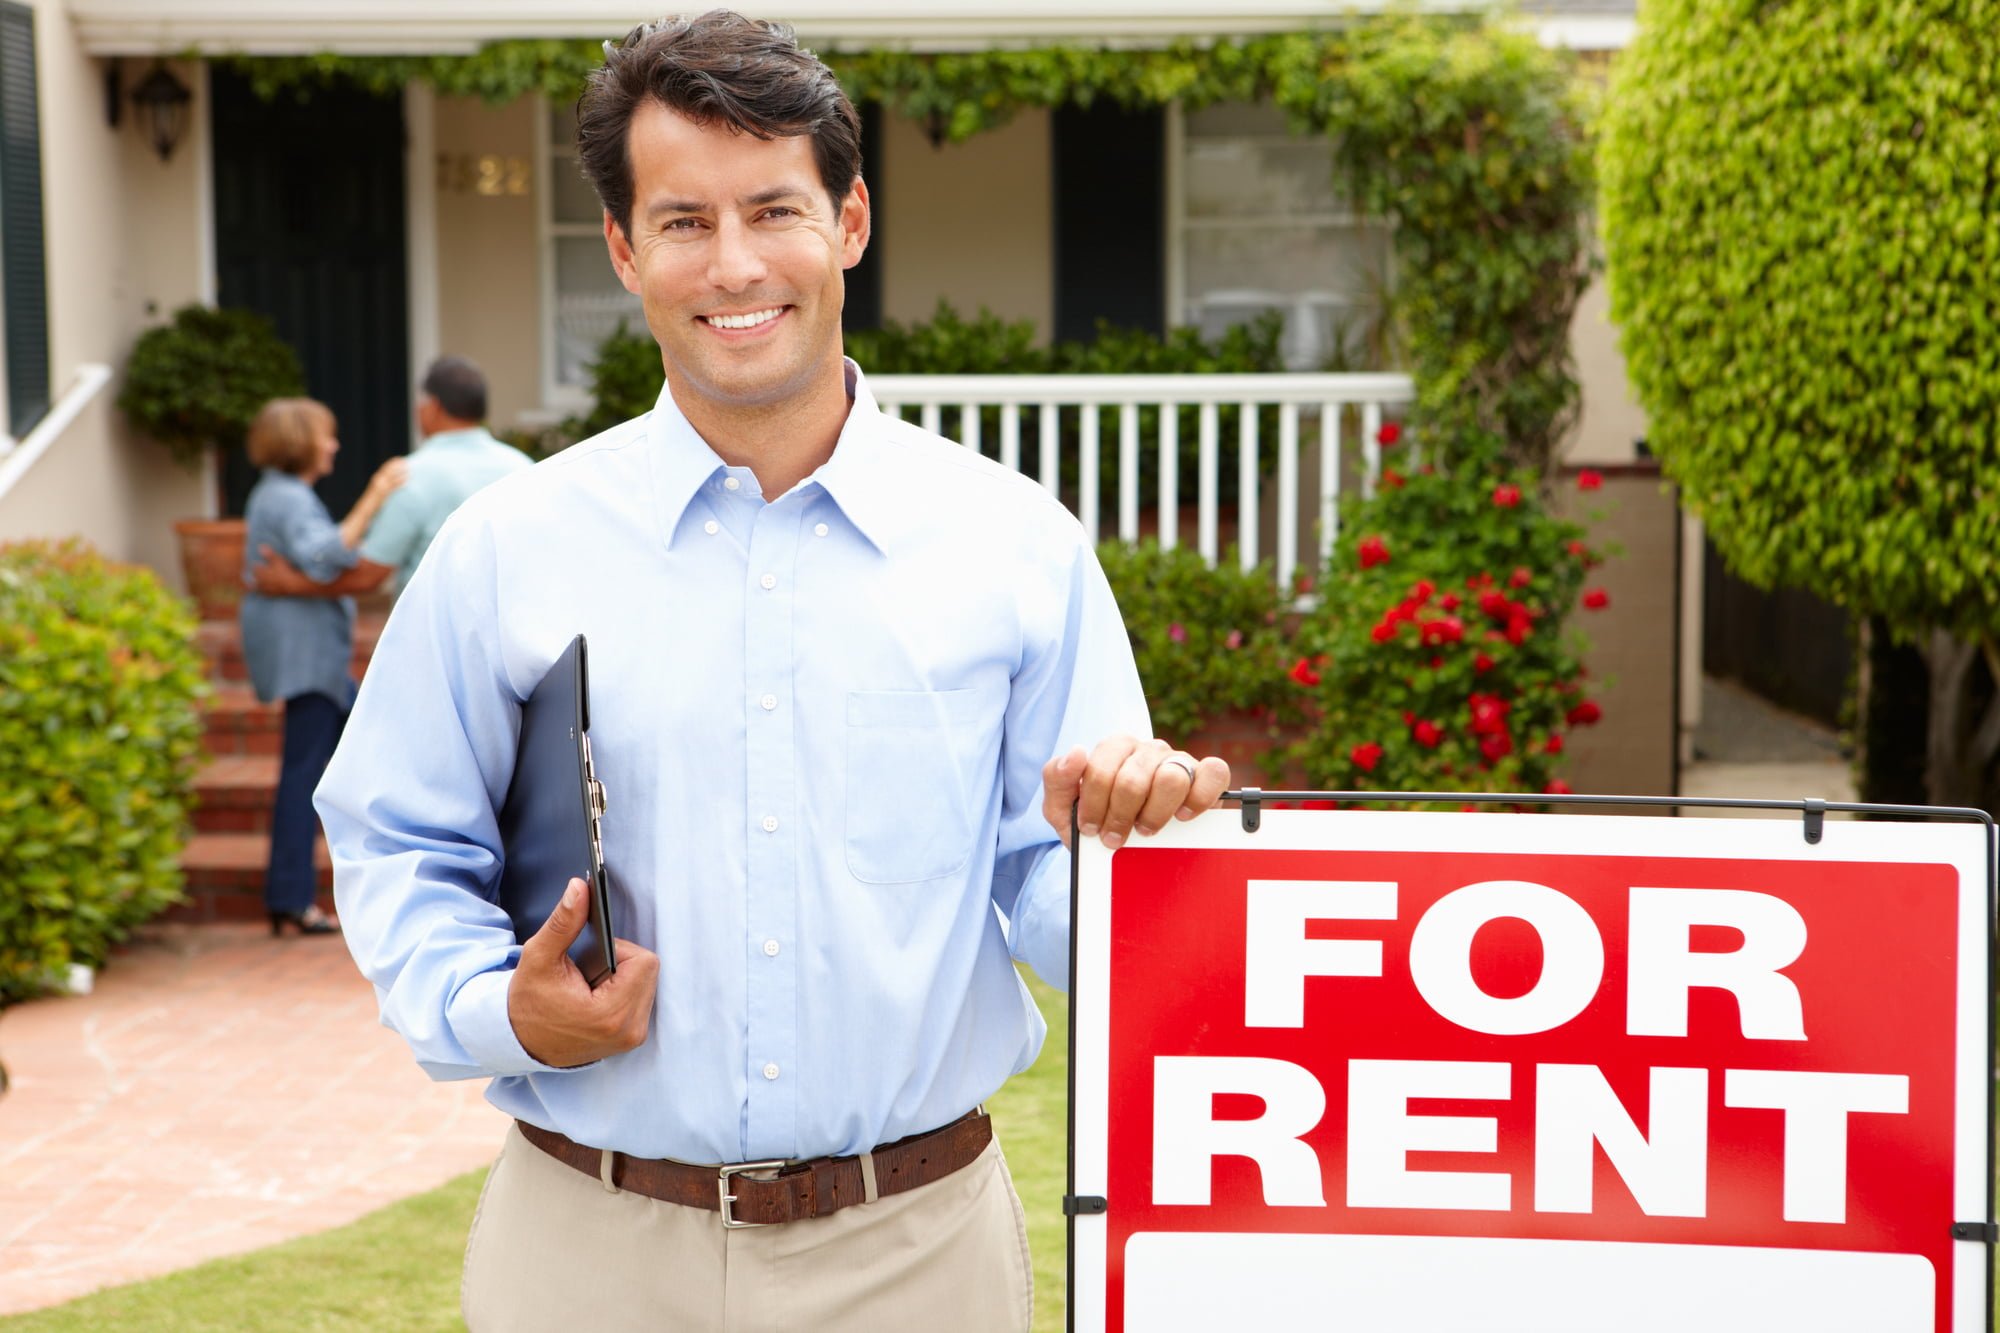 Are you looking to get started investing in rental properties? This is what you need to know before making your first investment.